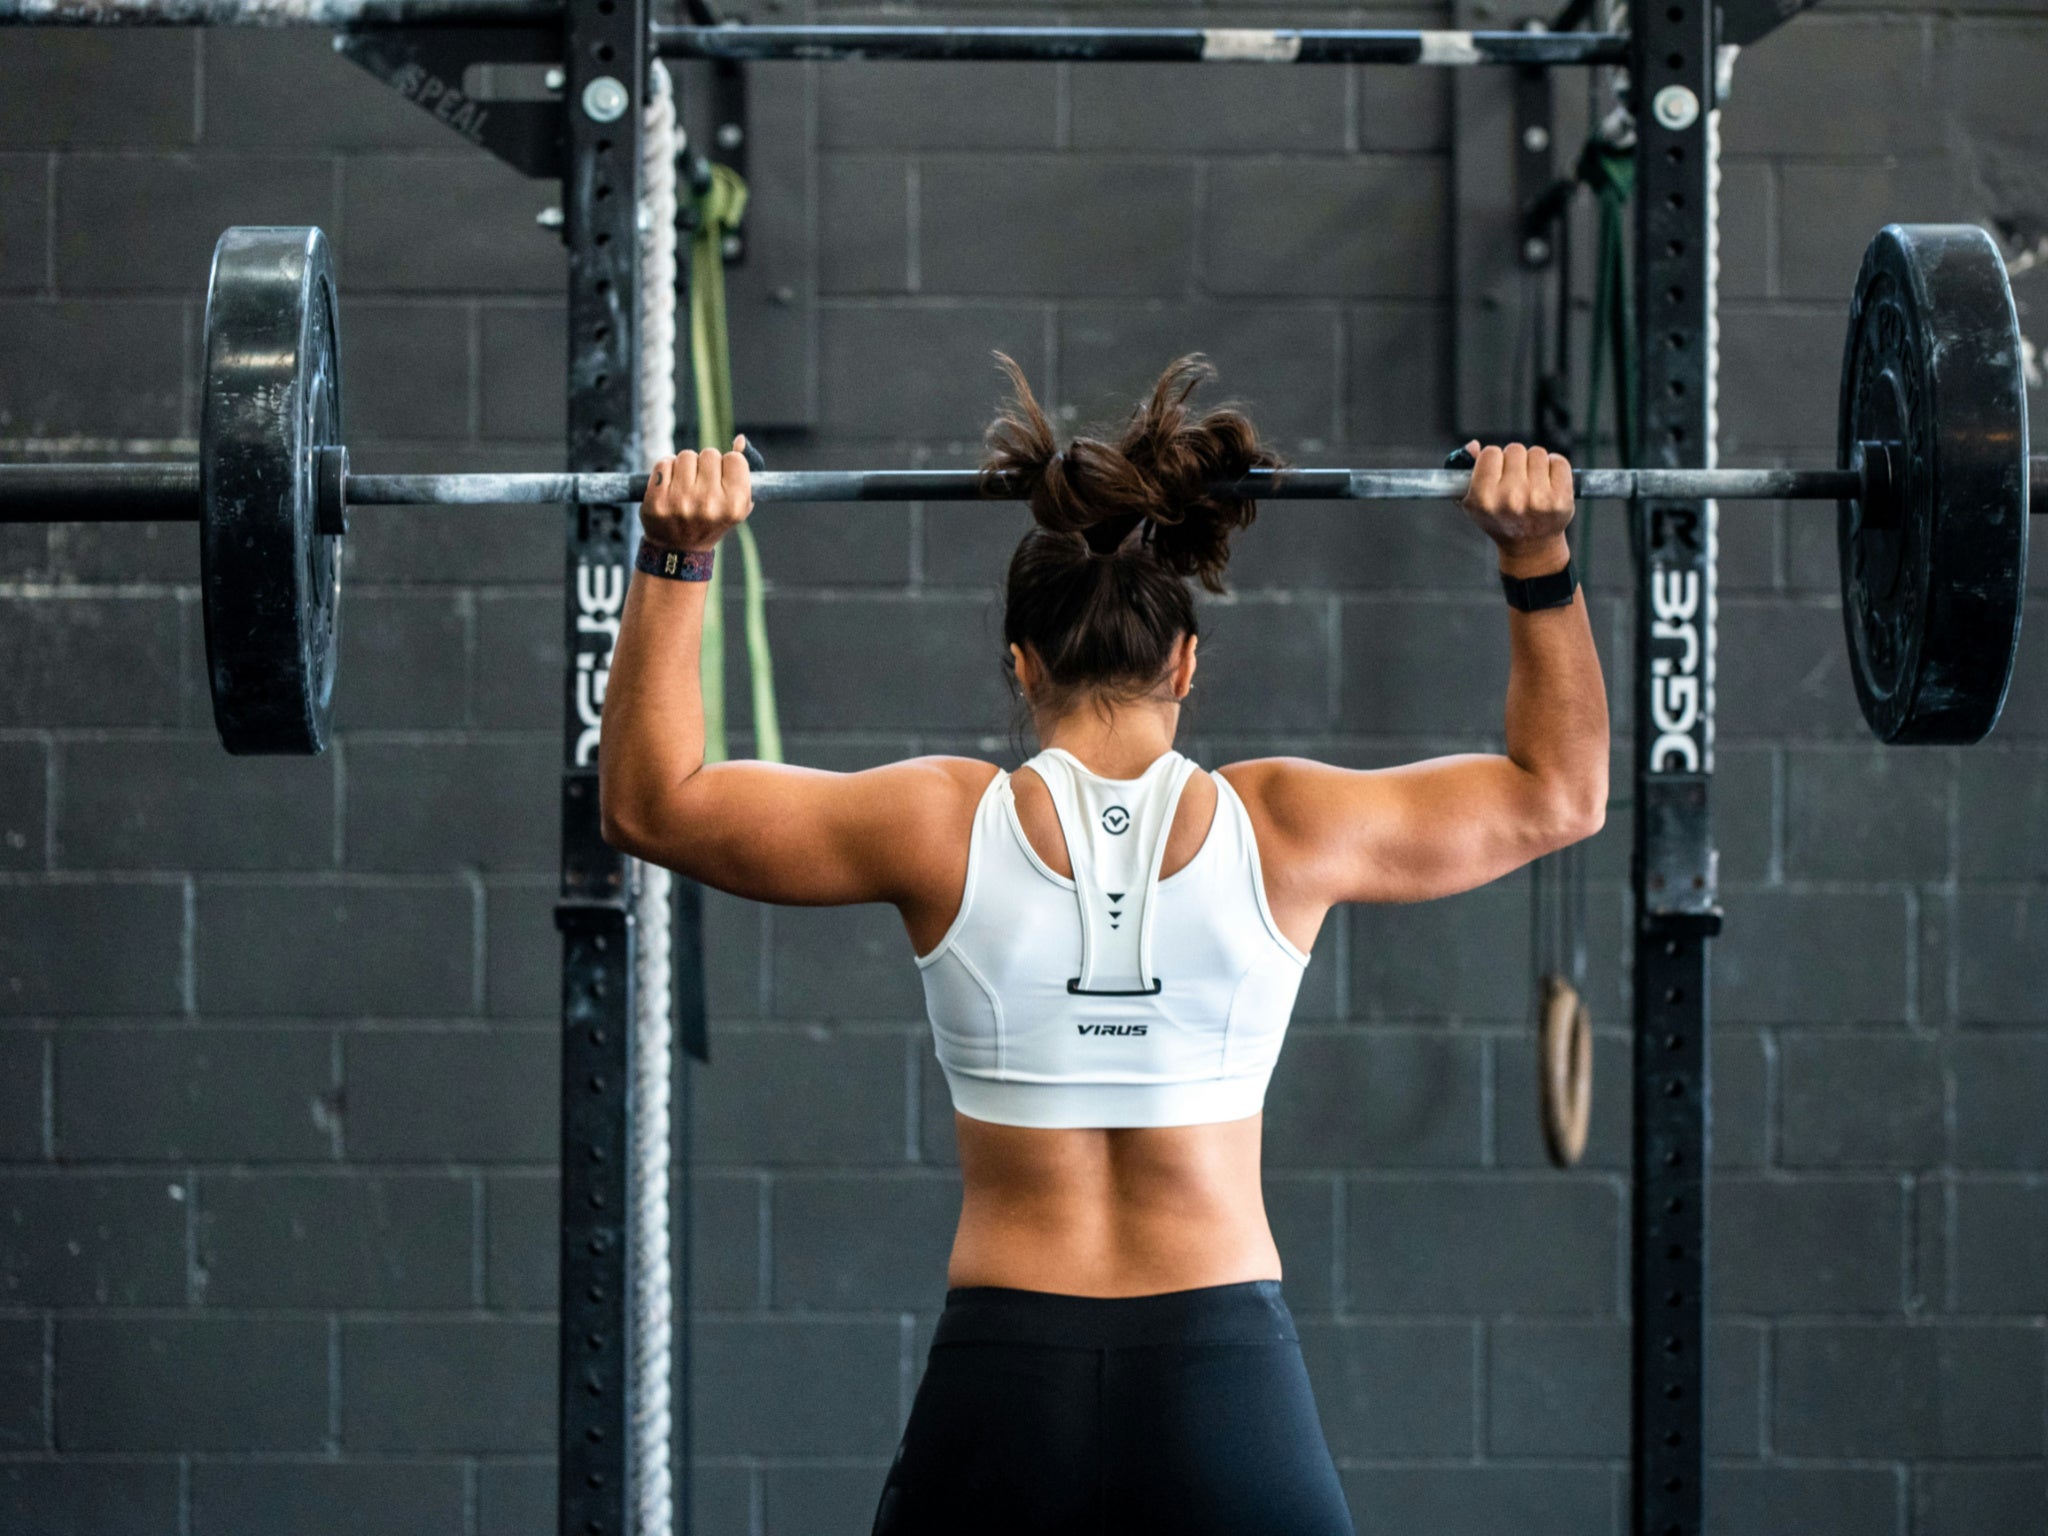 CrossFit involves a variety of Olympic weightlifting moves